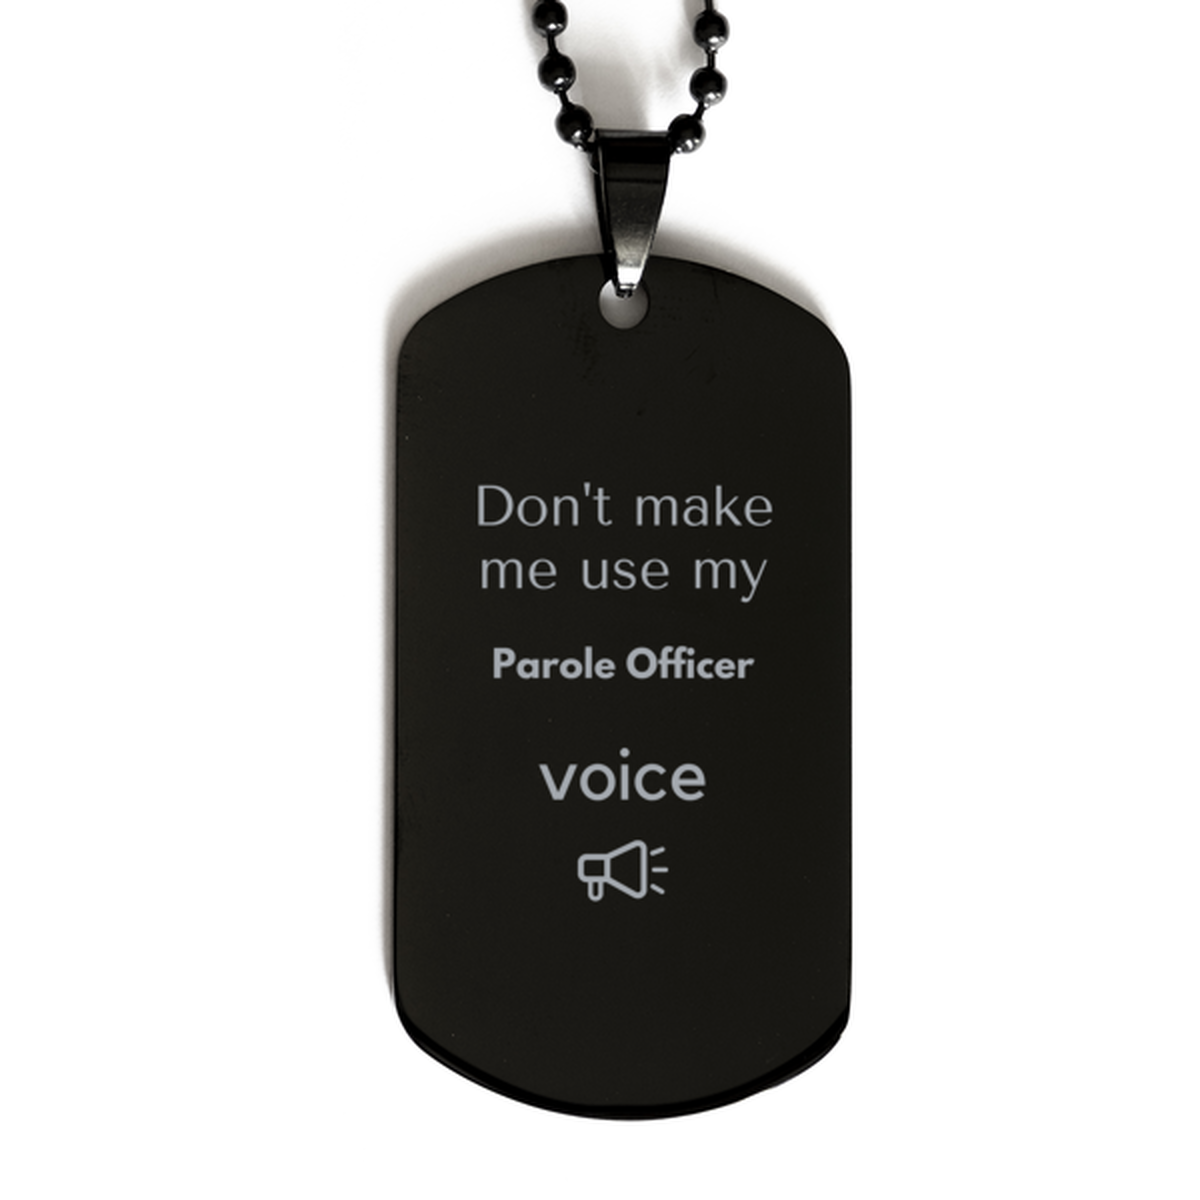 Don't make me use my Parole Officer voice, Sarcasm Parole Officer Gifts, Christmas Parole Officer Black Dog Tag Birthday Unique Gifts For Parole Officer Coworkers, Men, Women, Colleague, Friends